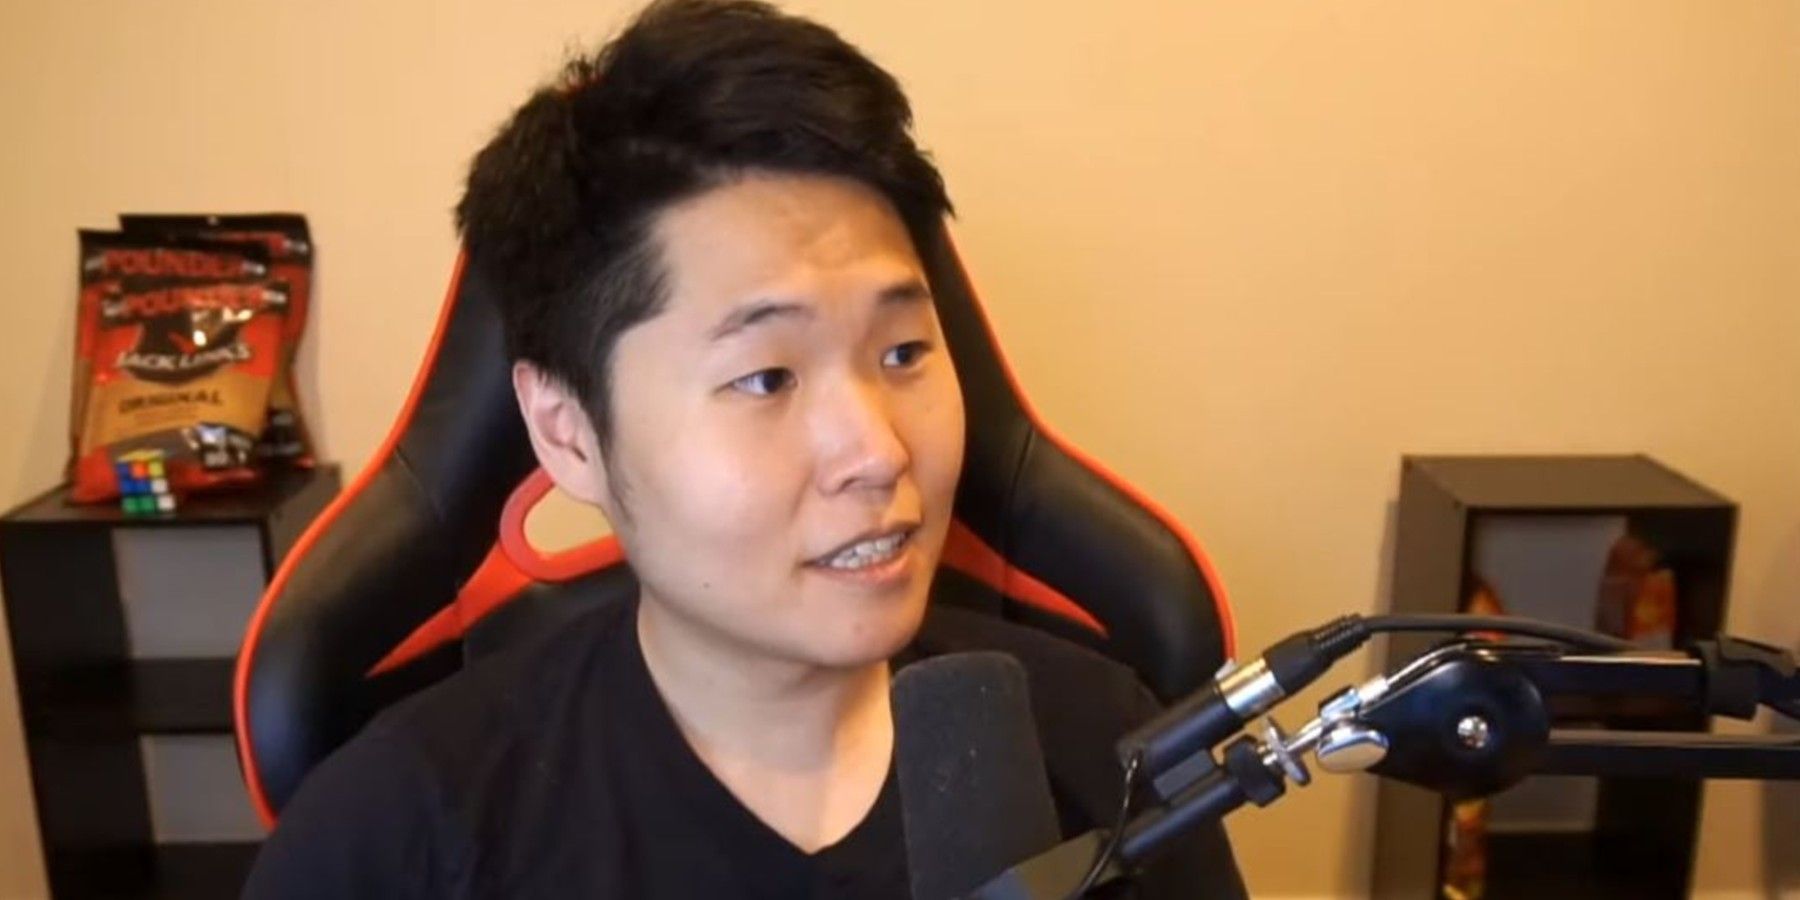 DisguisedToast-Hit-With-1-Month-Twitch-Ban-for-Streaming-Death-Note-Anime-1